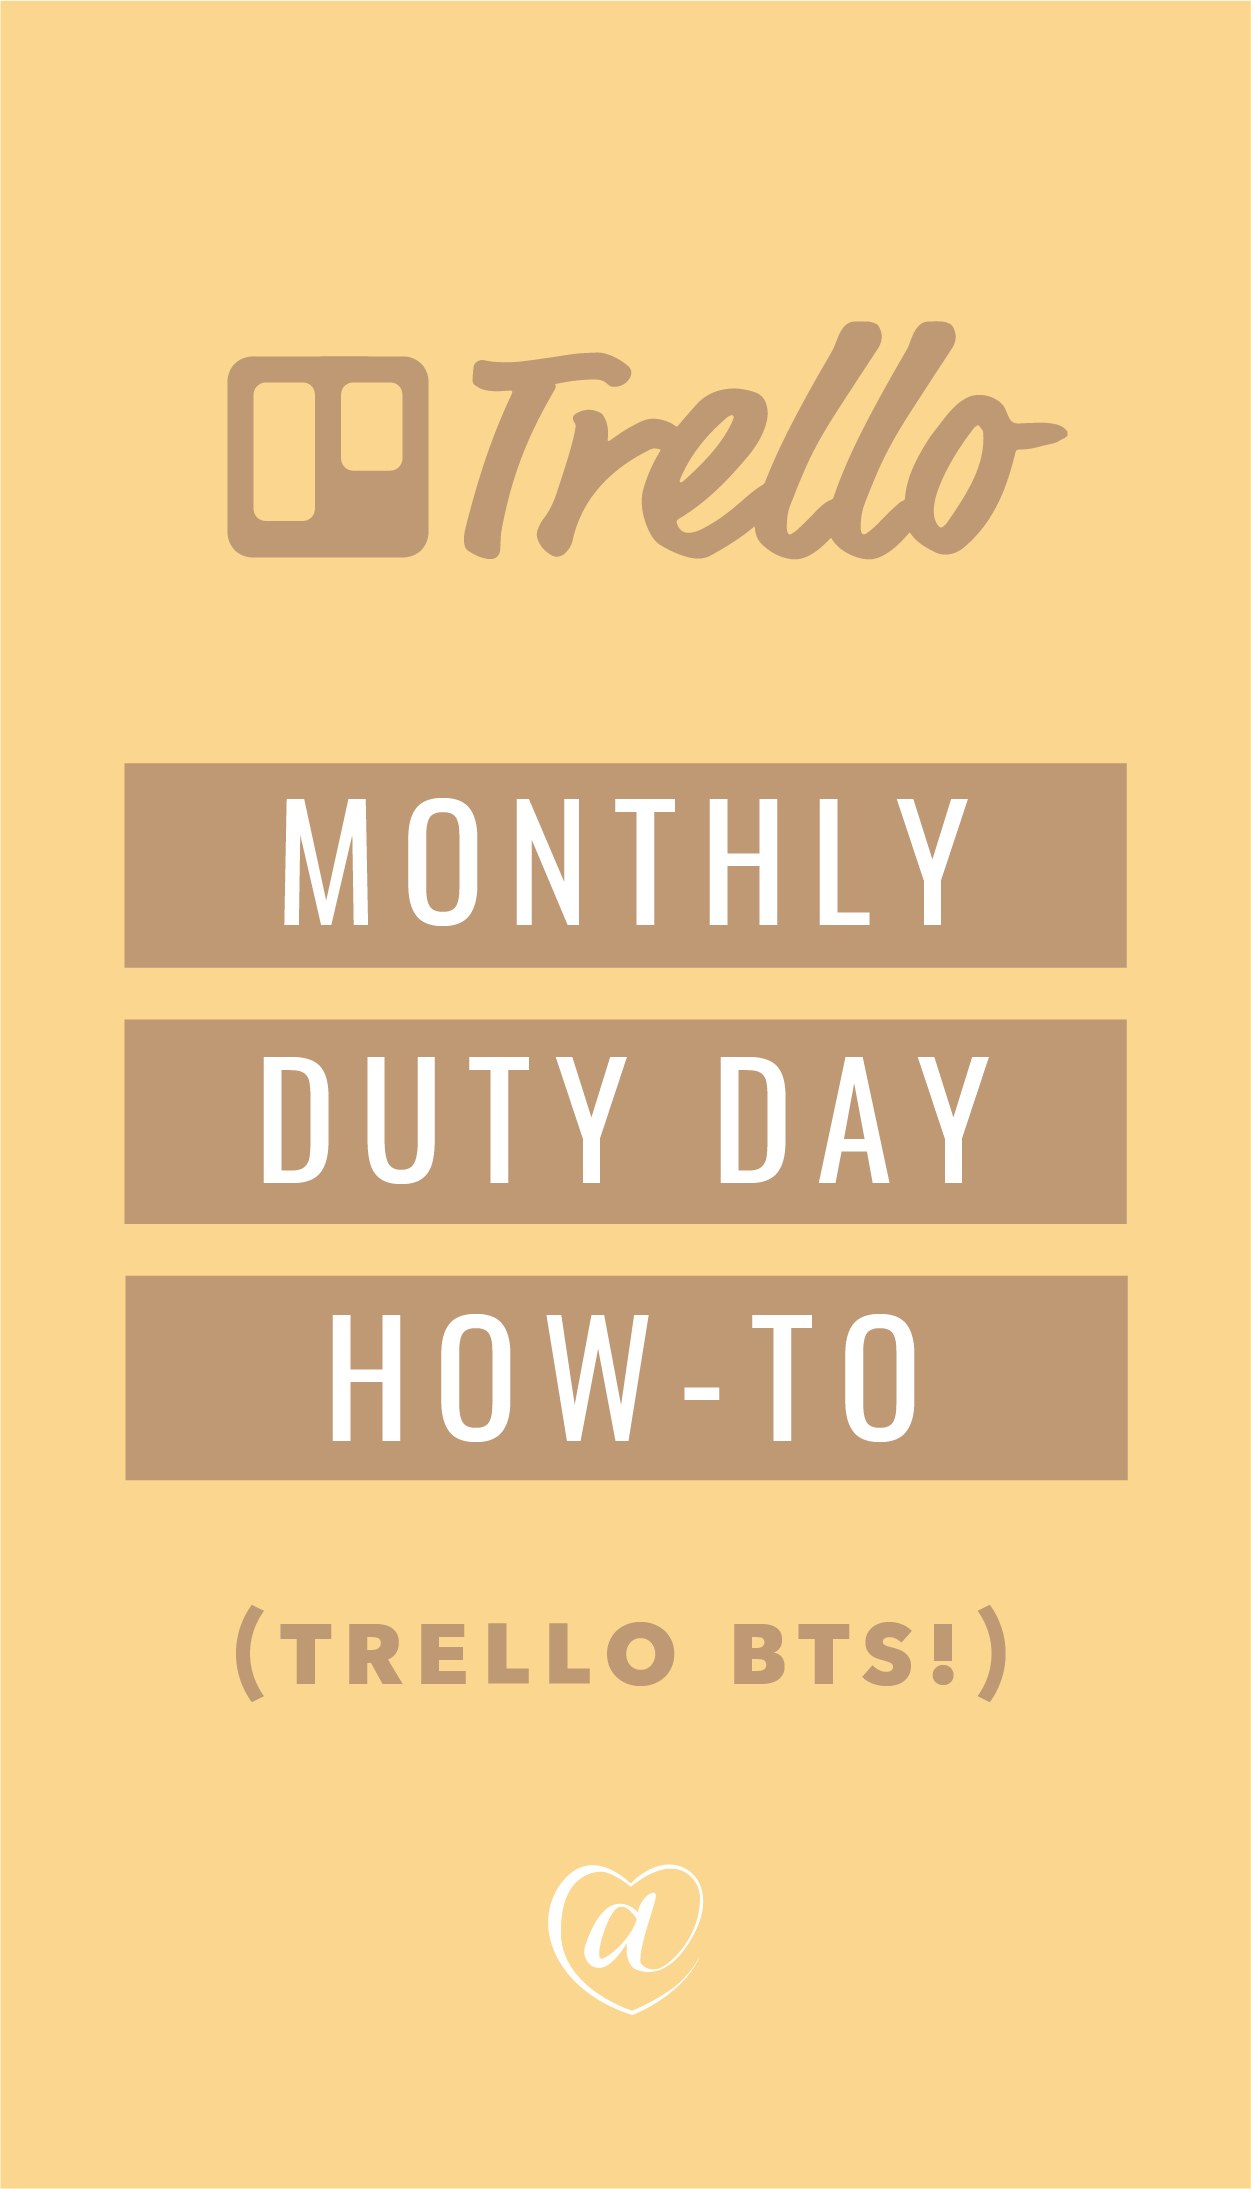 How I Organize Weekly To-Do’s & Big Picture Projects (Trello BTS) // Creative at Heart #productivity #organizingmyweek #goalsetting #gettingthingsdone #makingthingshappen #smallbusiness #bosslady #themedays #2weekguidebook